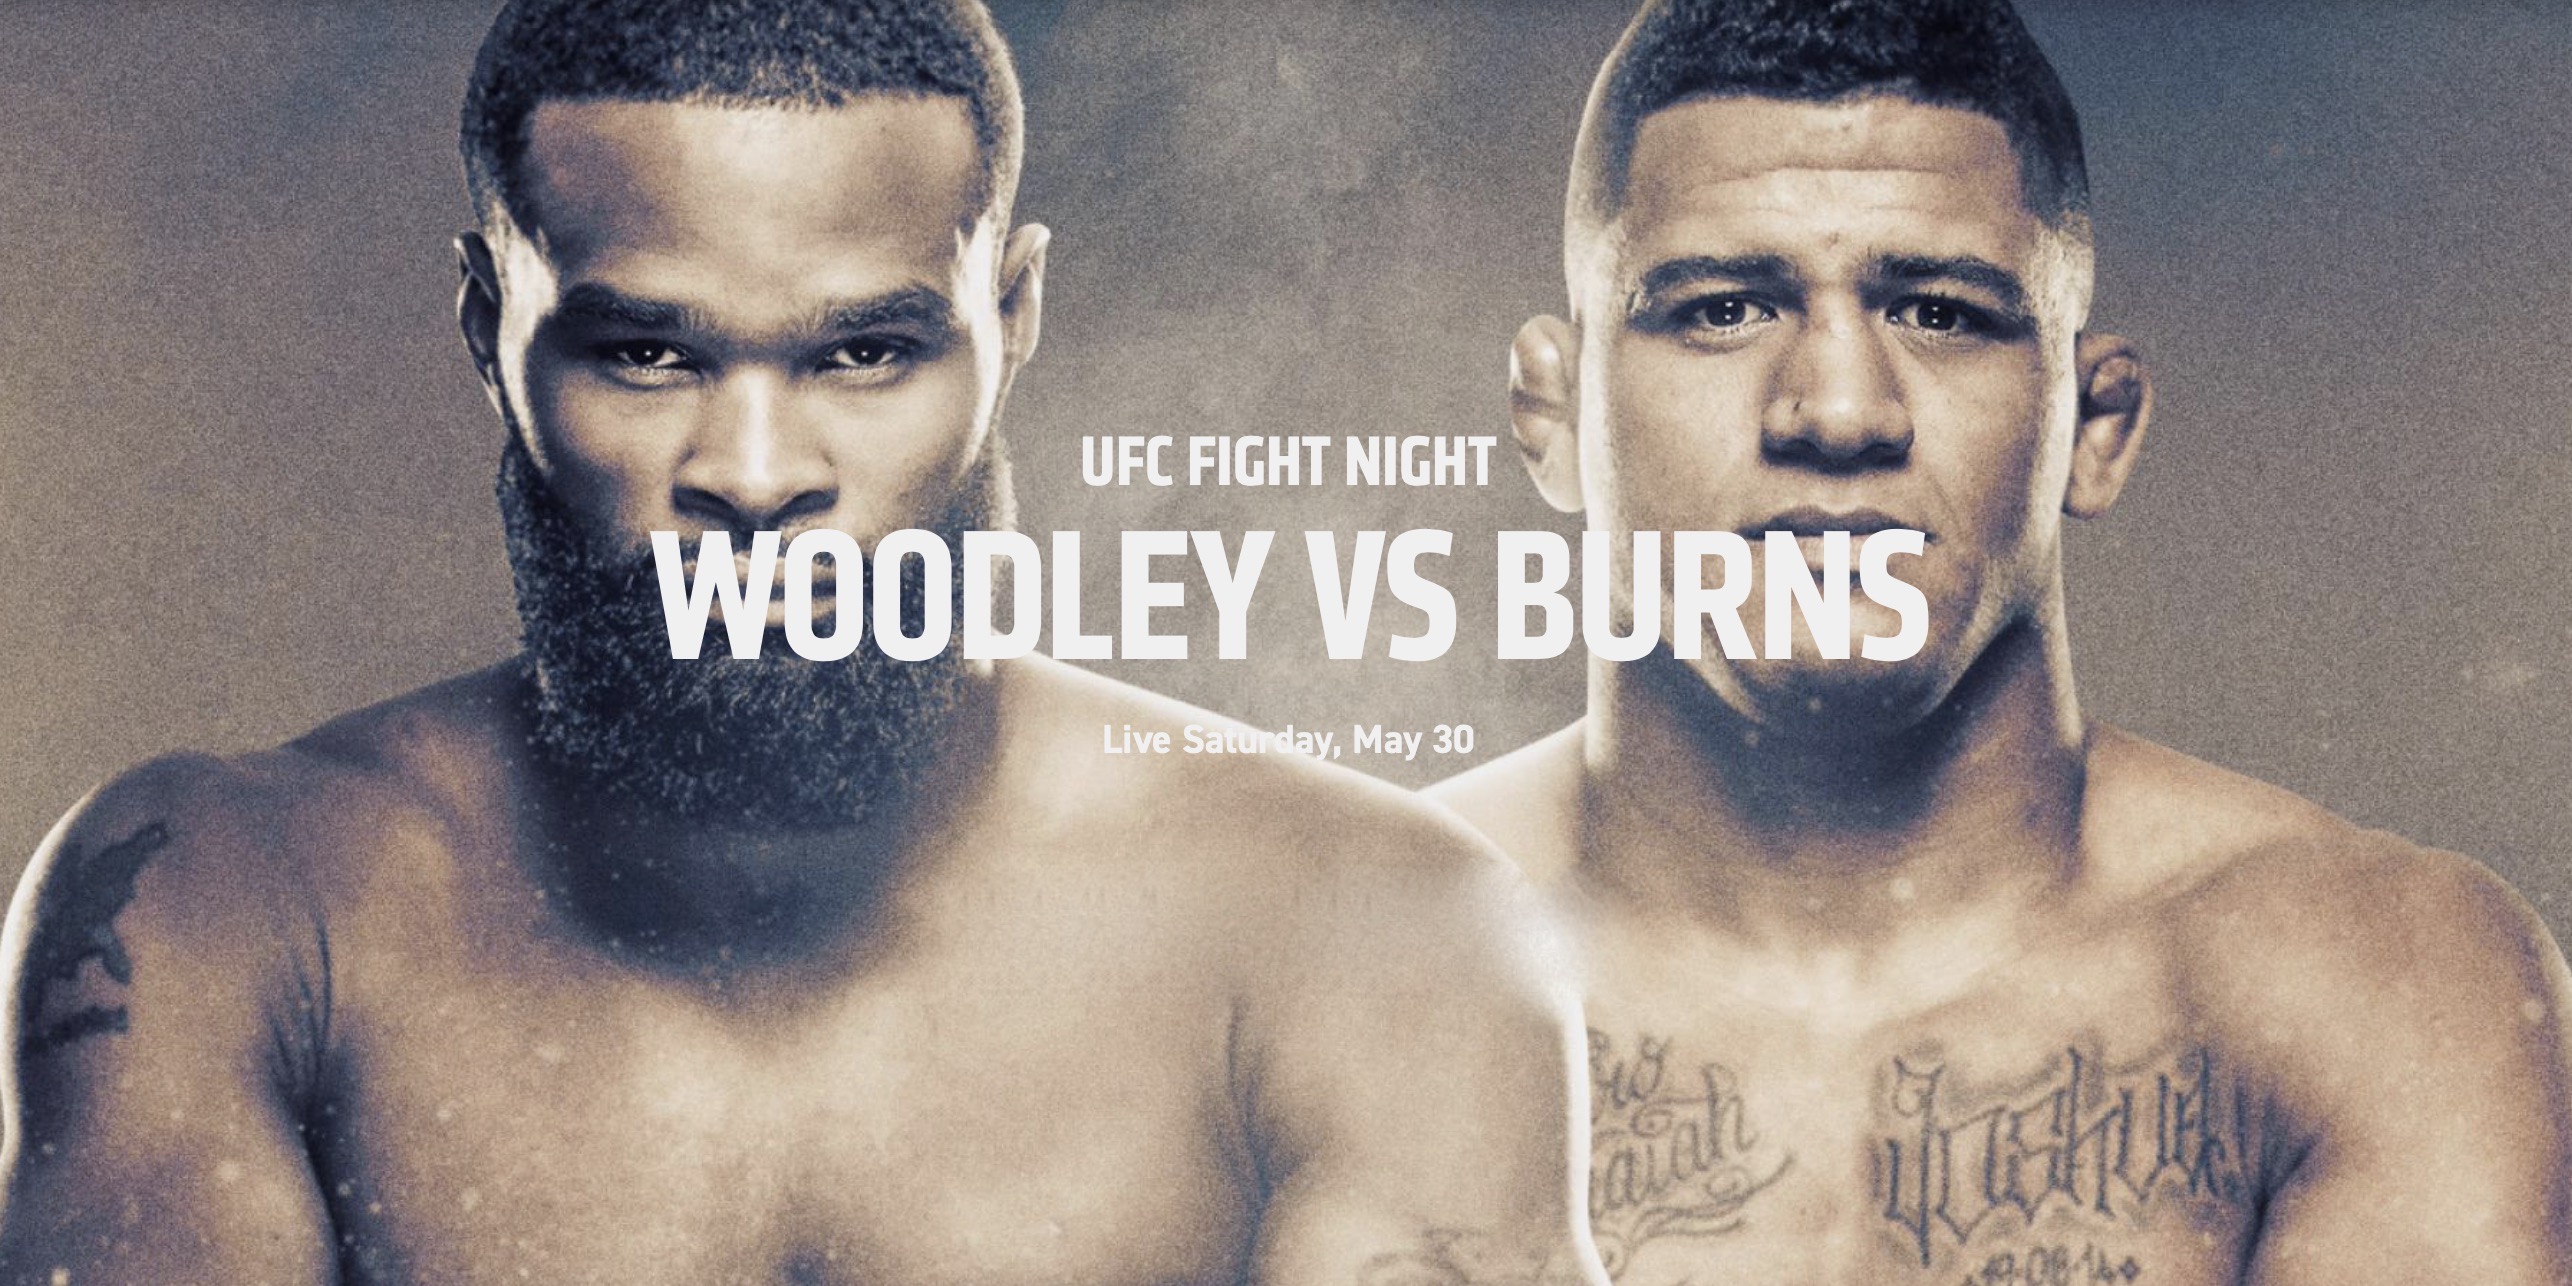 How to watch UFC Fight Night Woodley vs Burns on iPhone